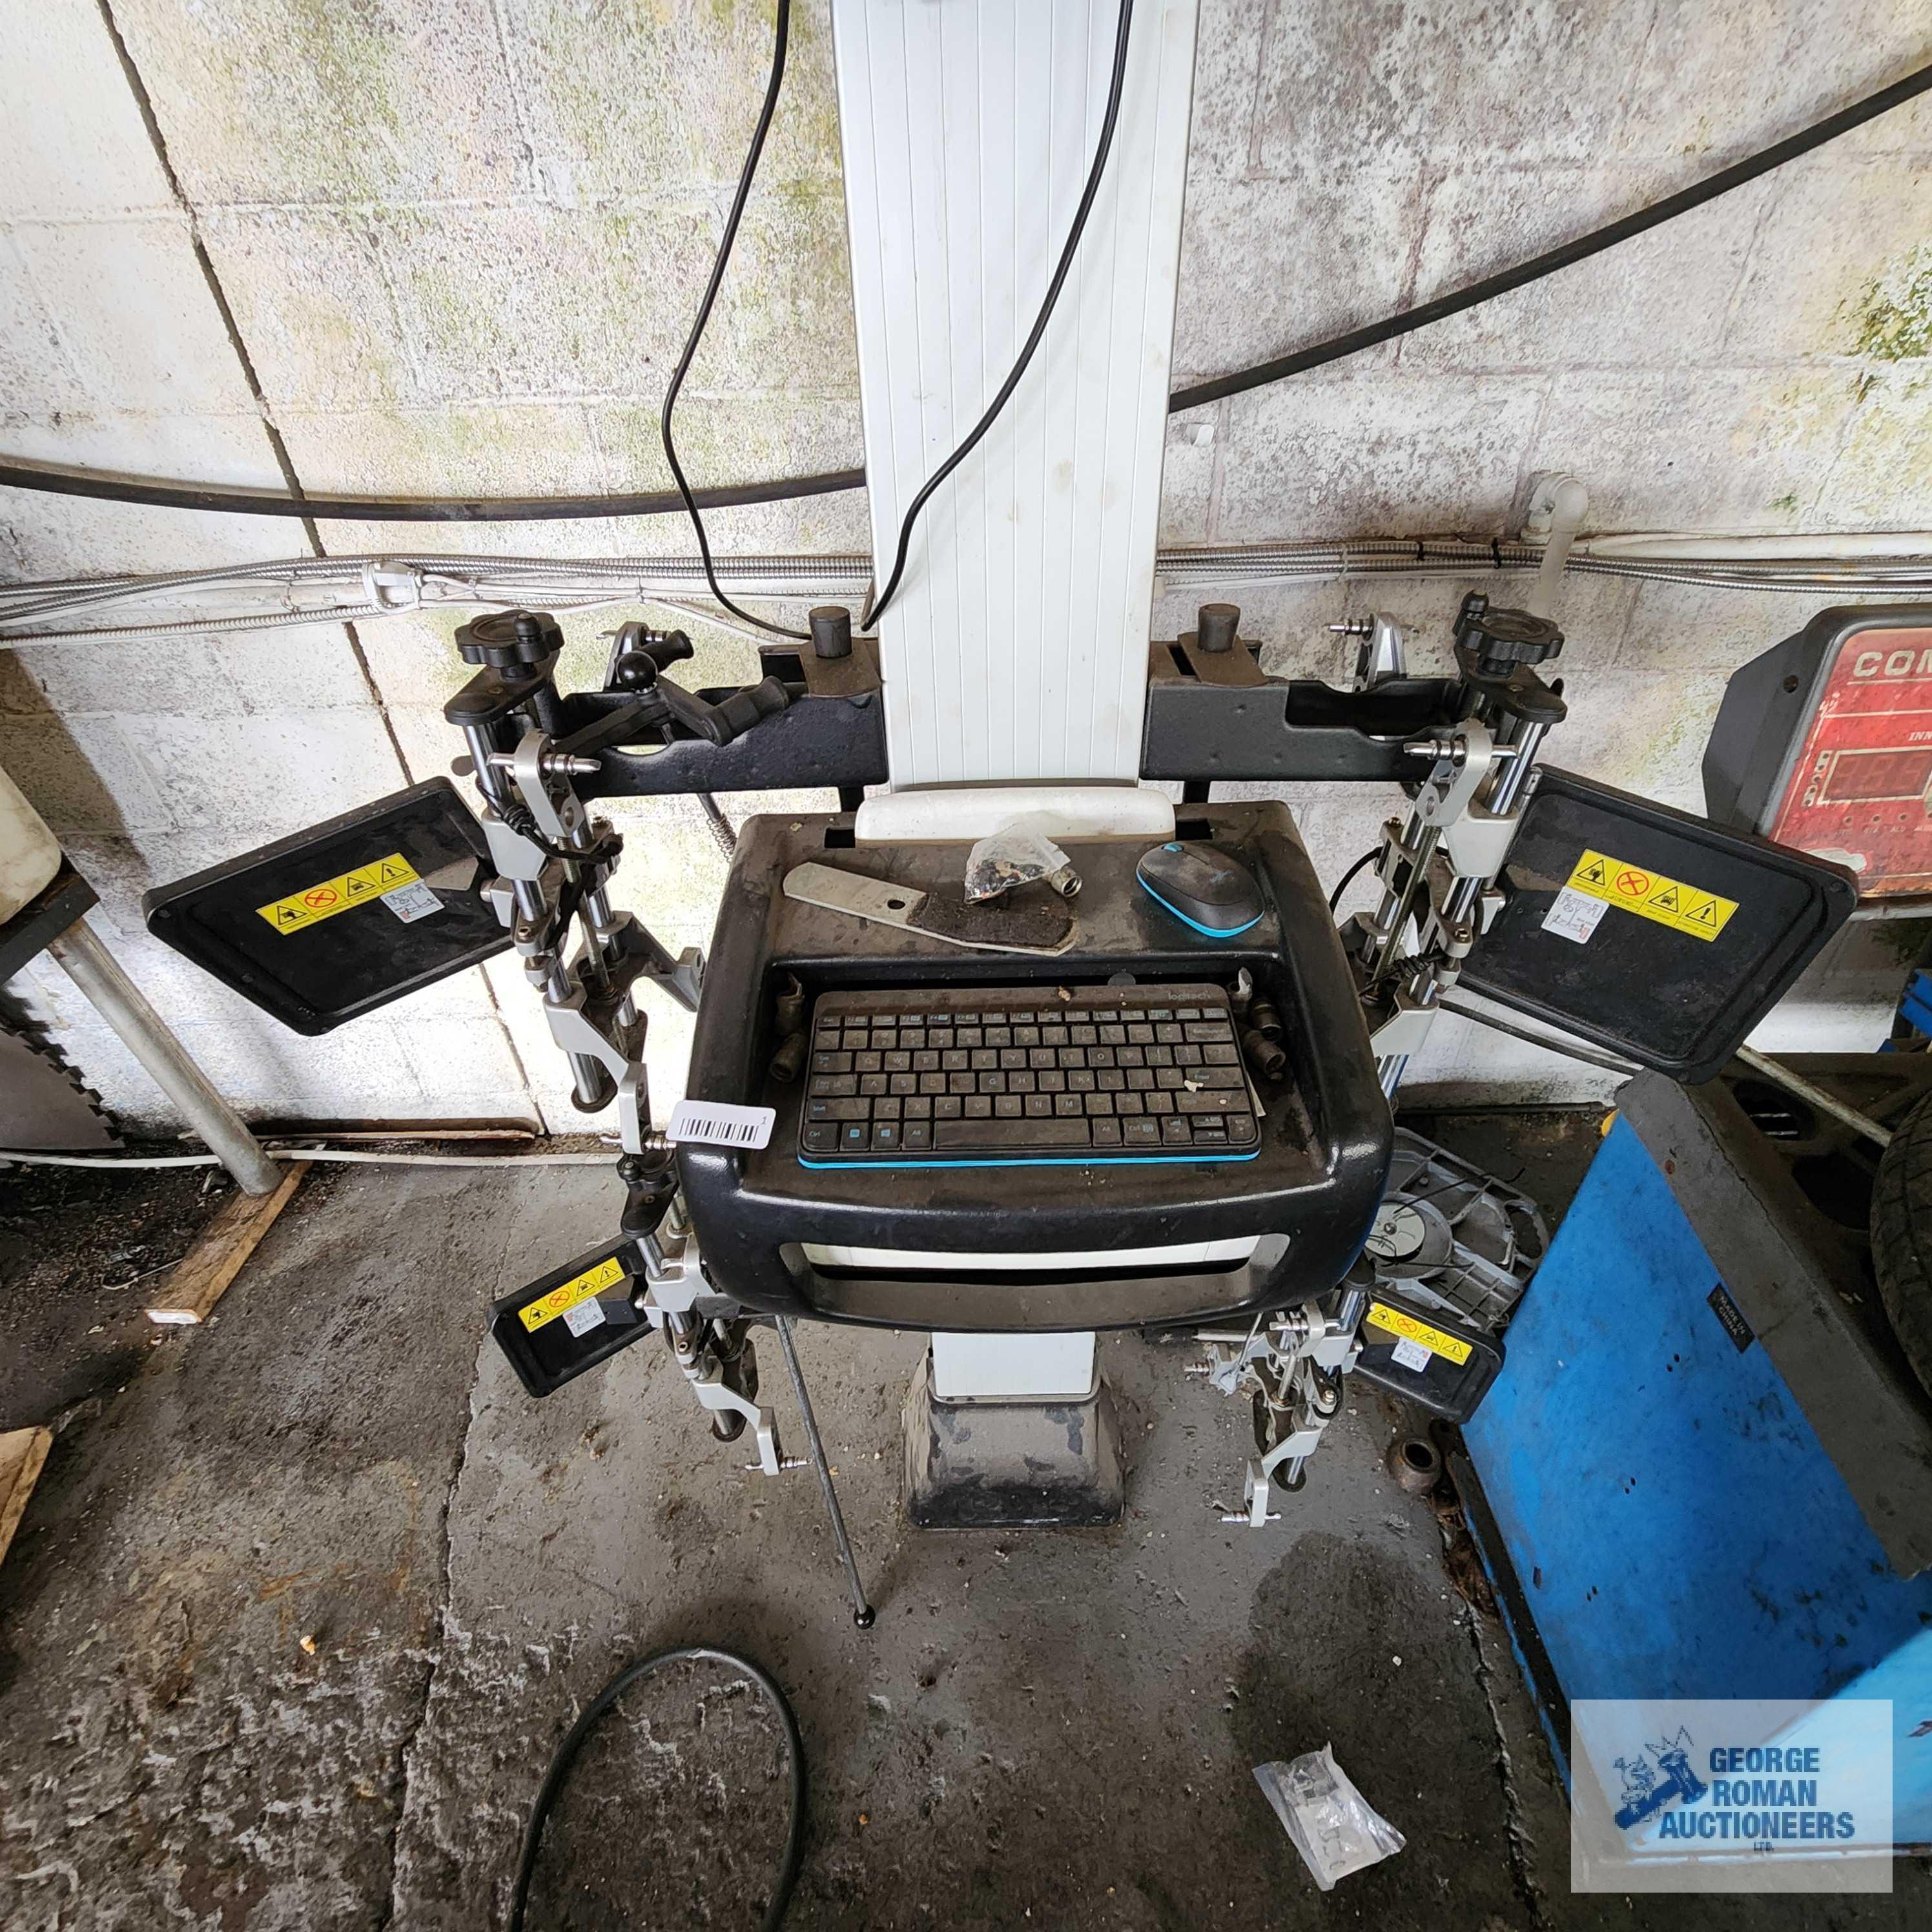 3D wheel alignment machine model KED-V6. Bring tools for removal. Sold subject to seller